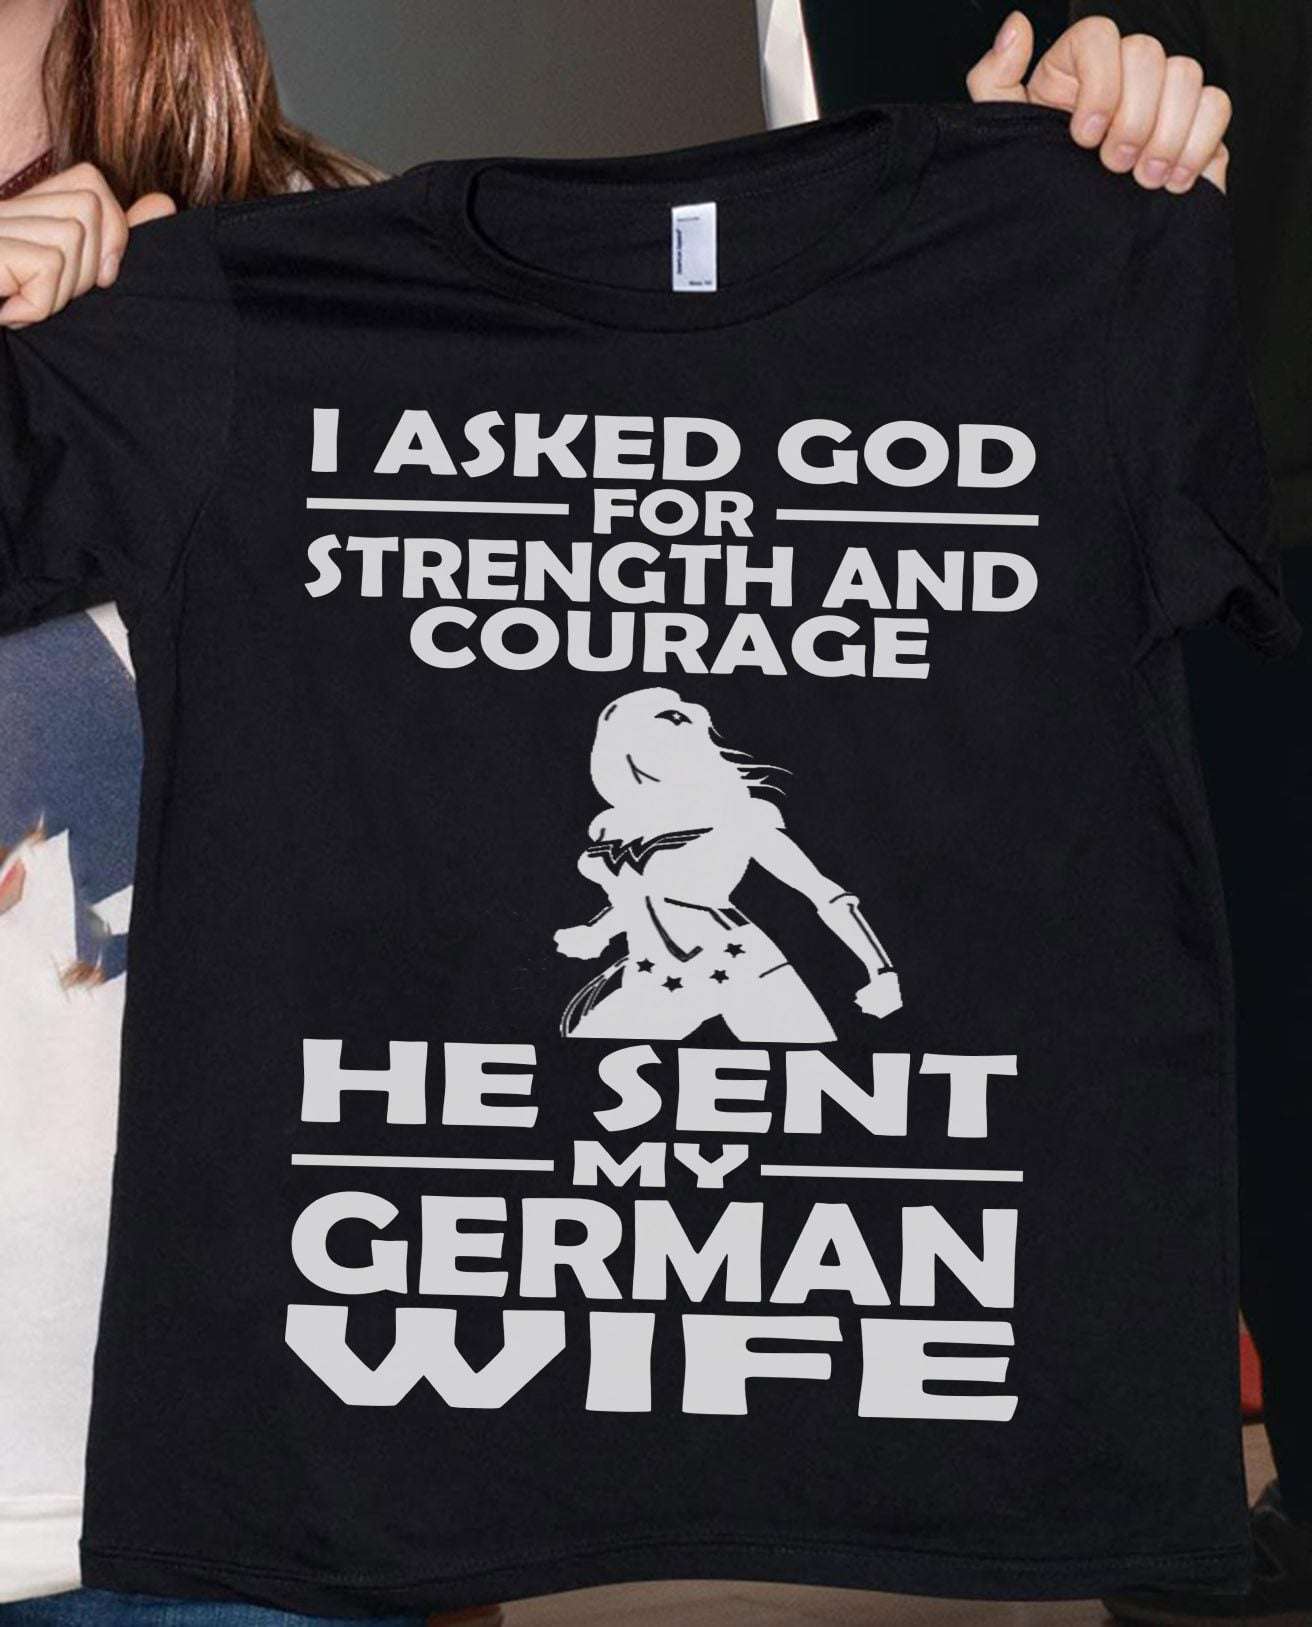 I asked god for strength and courage, he sent my German wife - Husband and wife